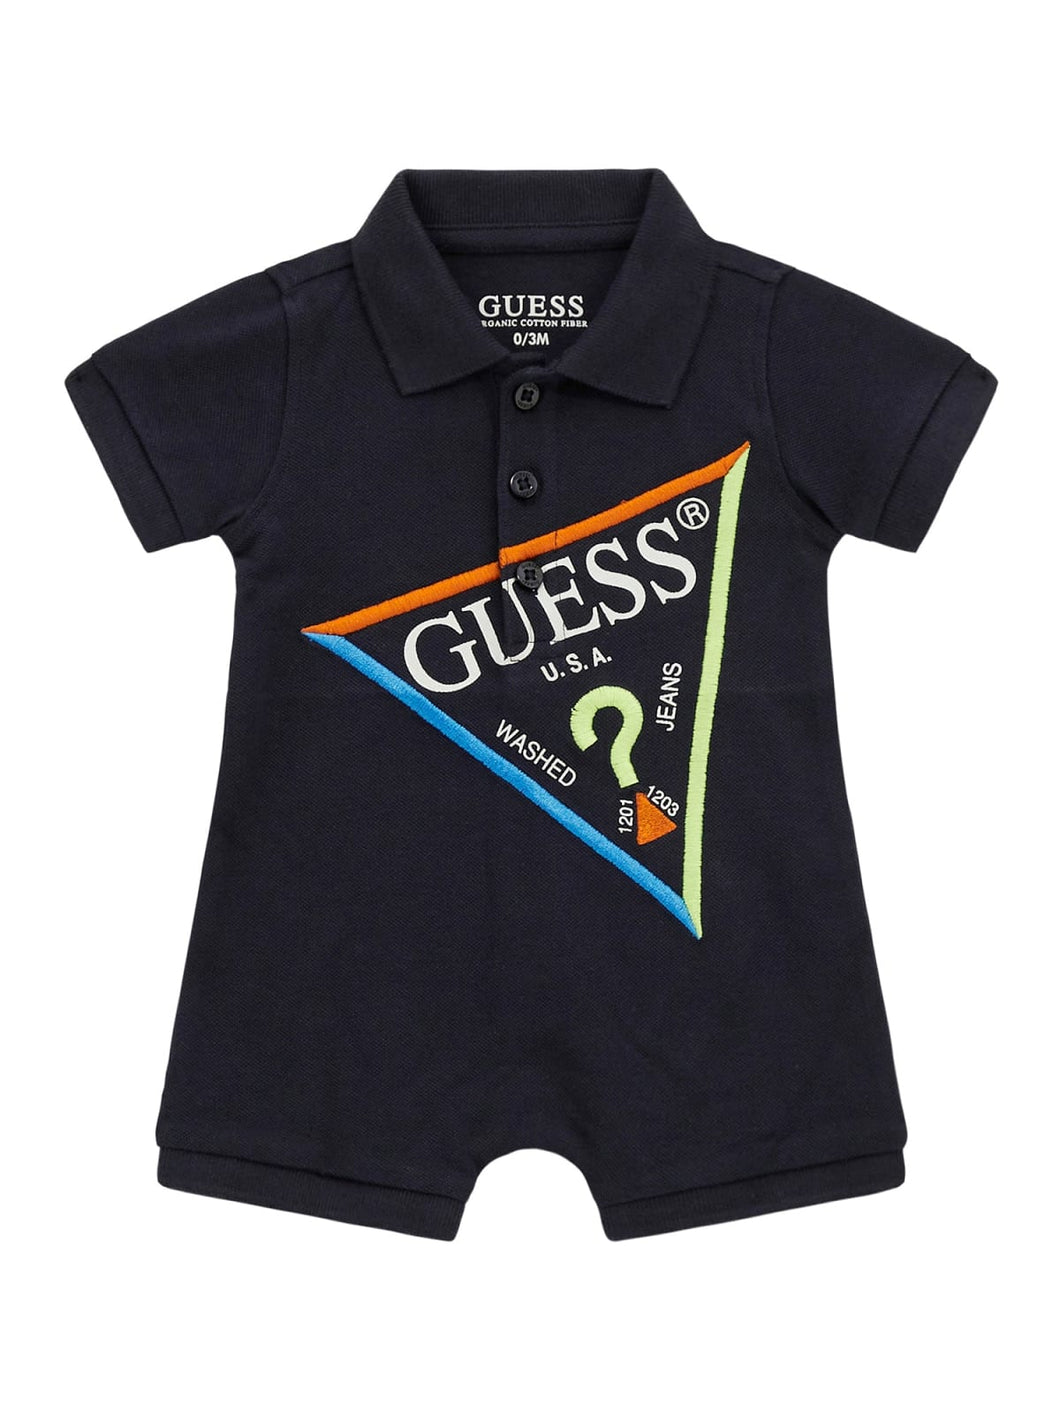 Guess Baby Boy Navy Blue Overall